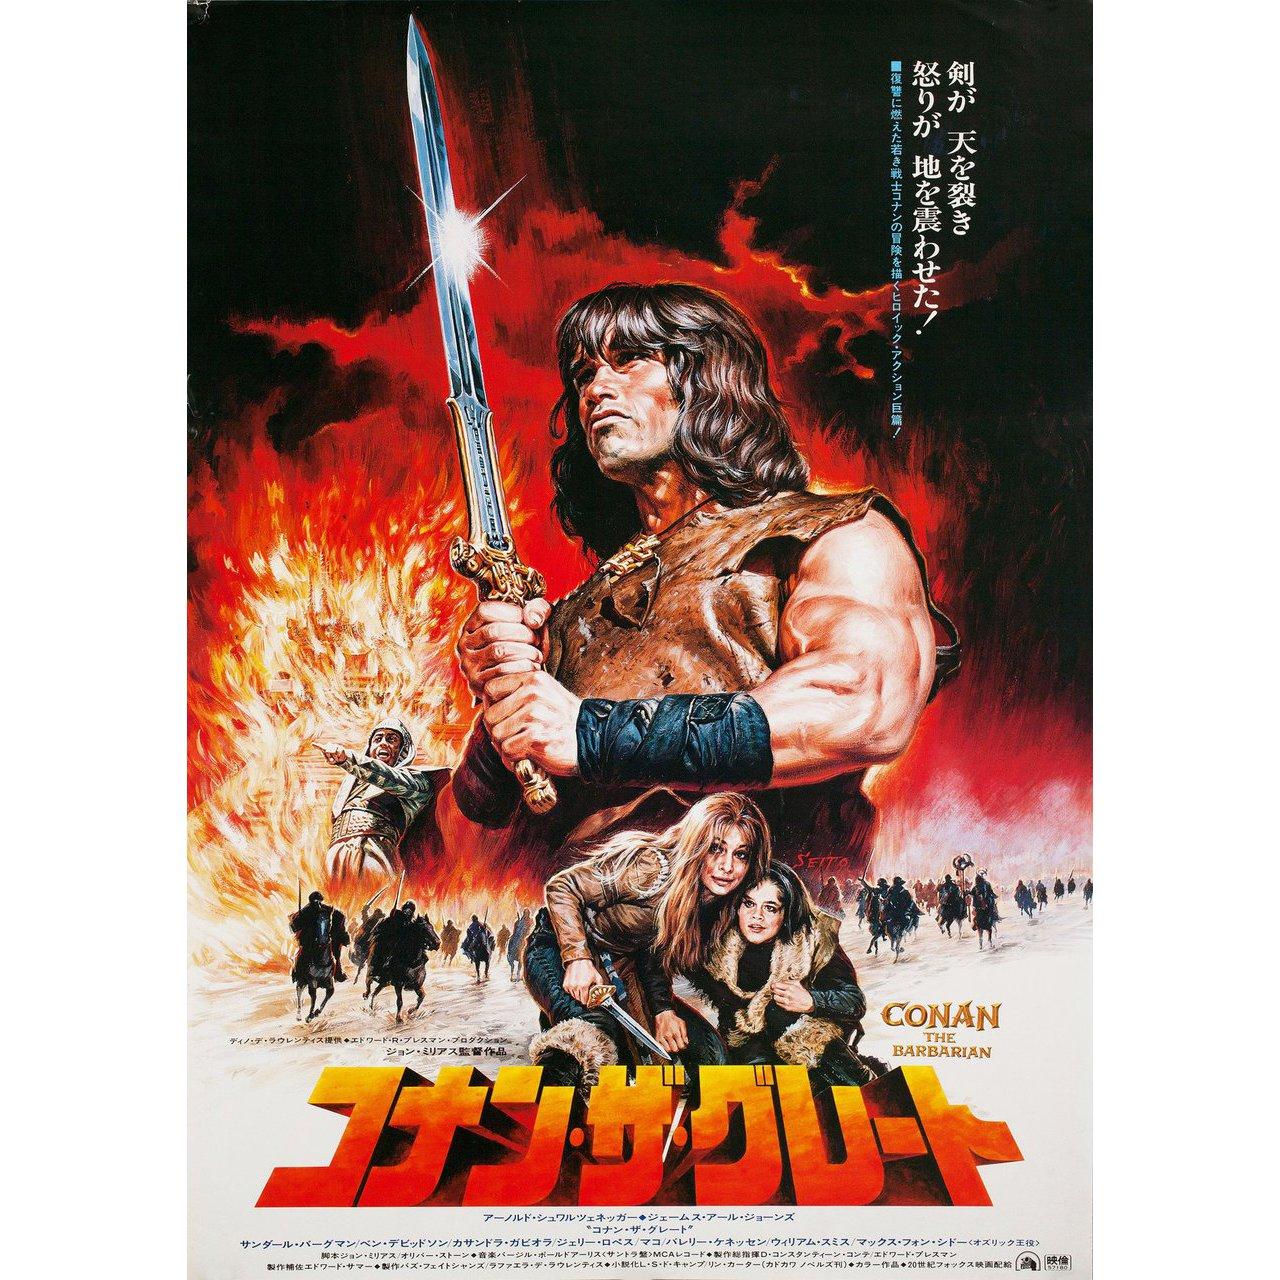 Original 1982 Japanese B2 poster by Seito for the film Conan the Barbarian directed by John Milius with Arnold Schwarzenegger / James Earl Jones / Max von Sydow / Sandahl Bergman. Very good-fine condition, rolled. Please note: the size is stated in